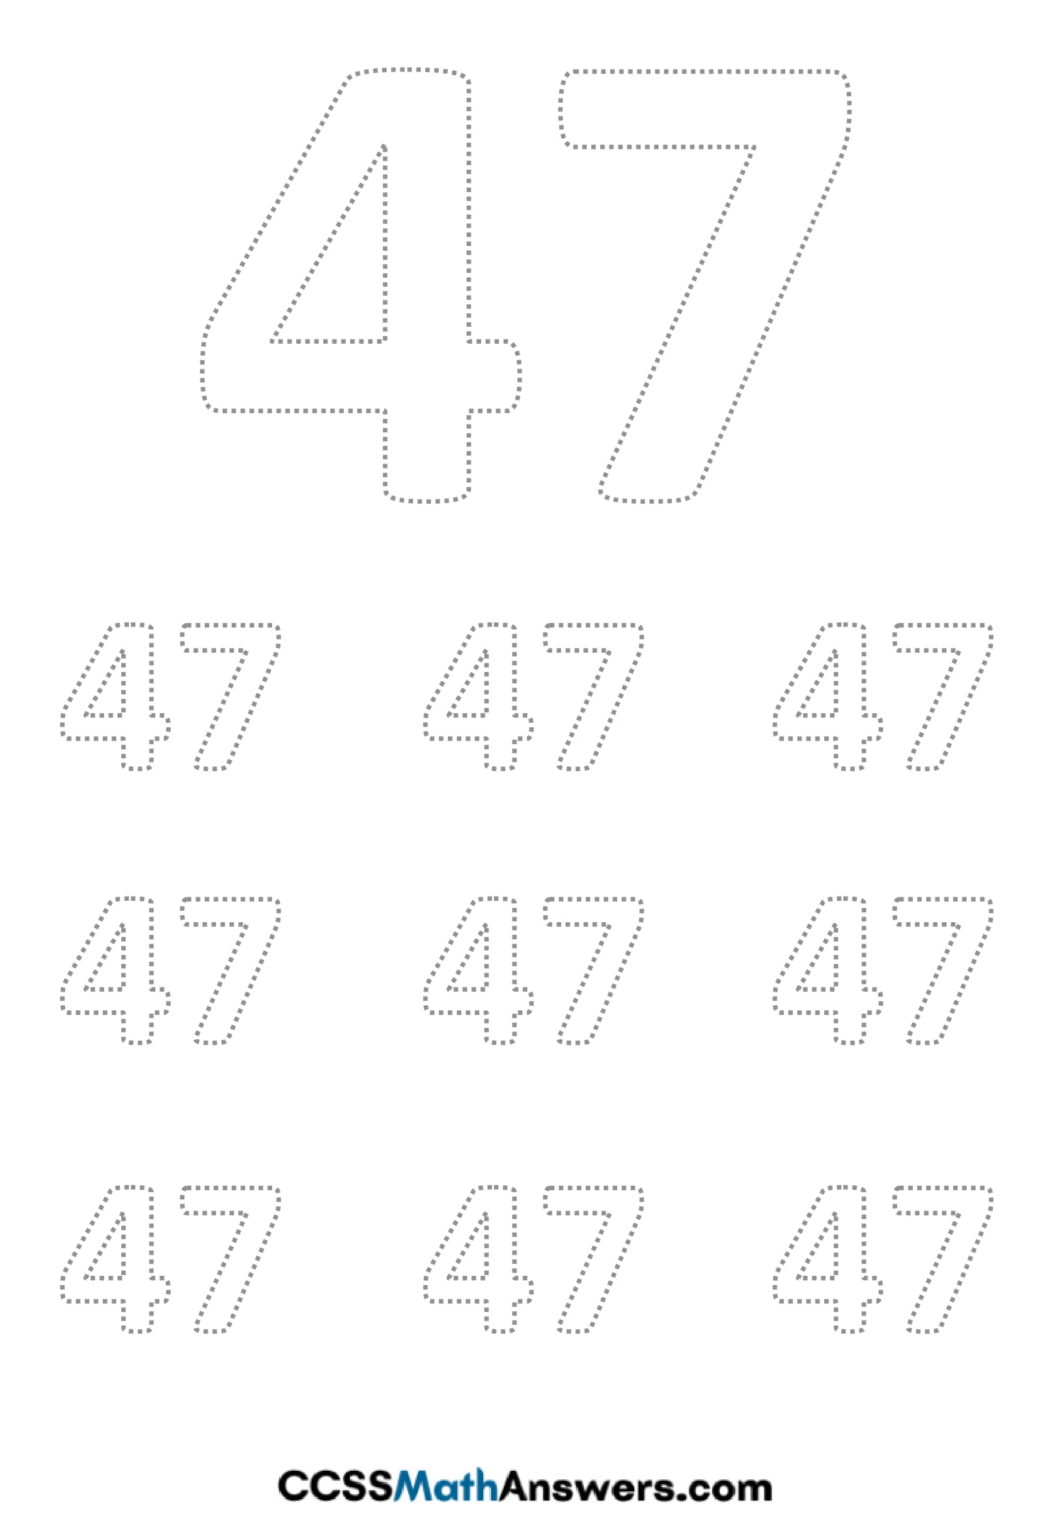 Worksheet On Number 47 Number 47 Tracing Writing Worksheets For Preschool CCSS Math Answers